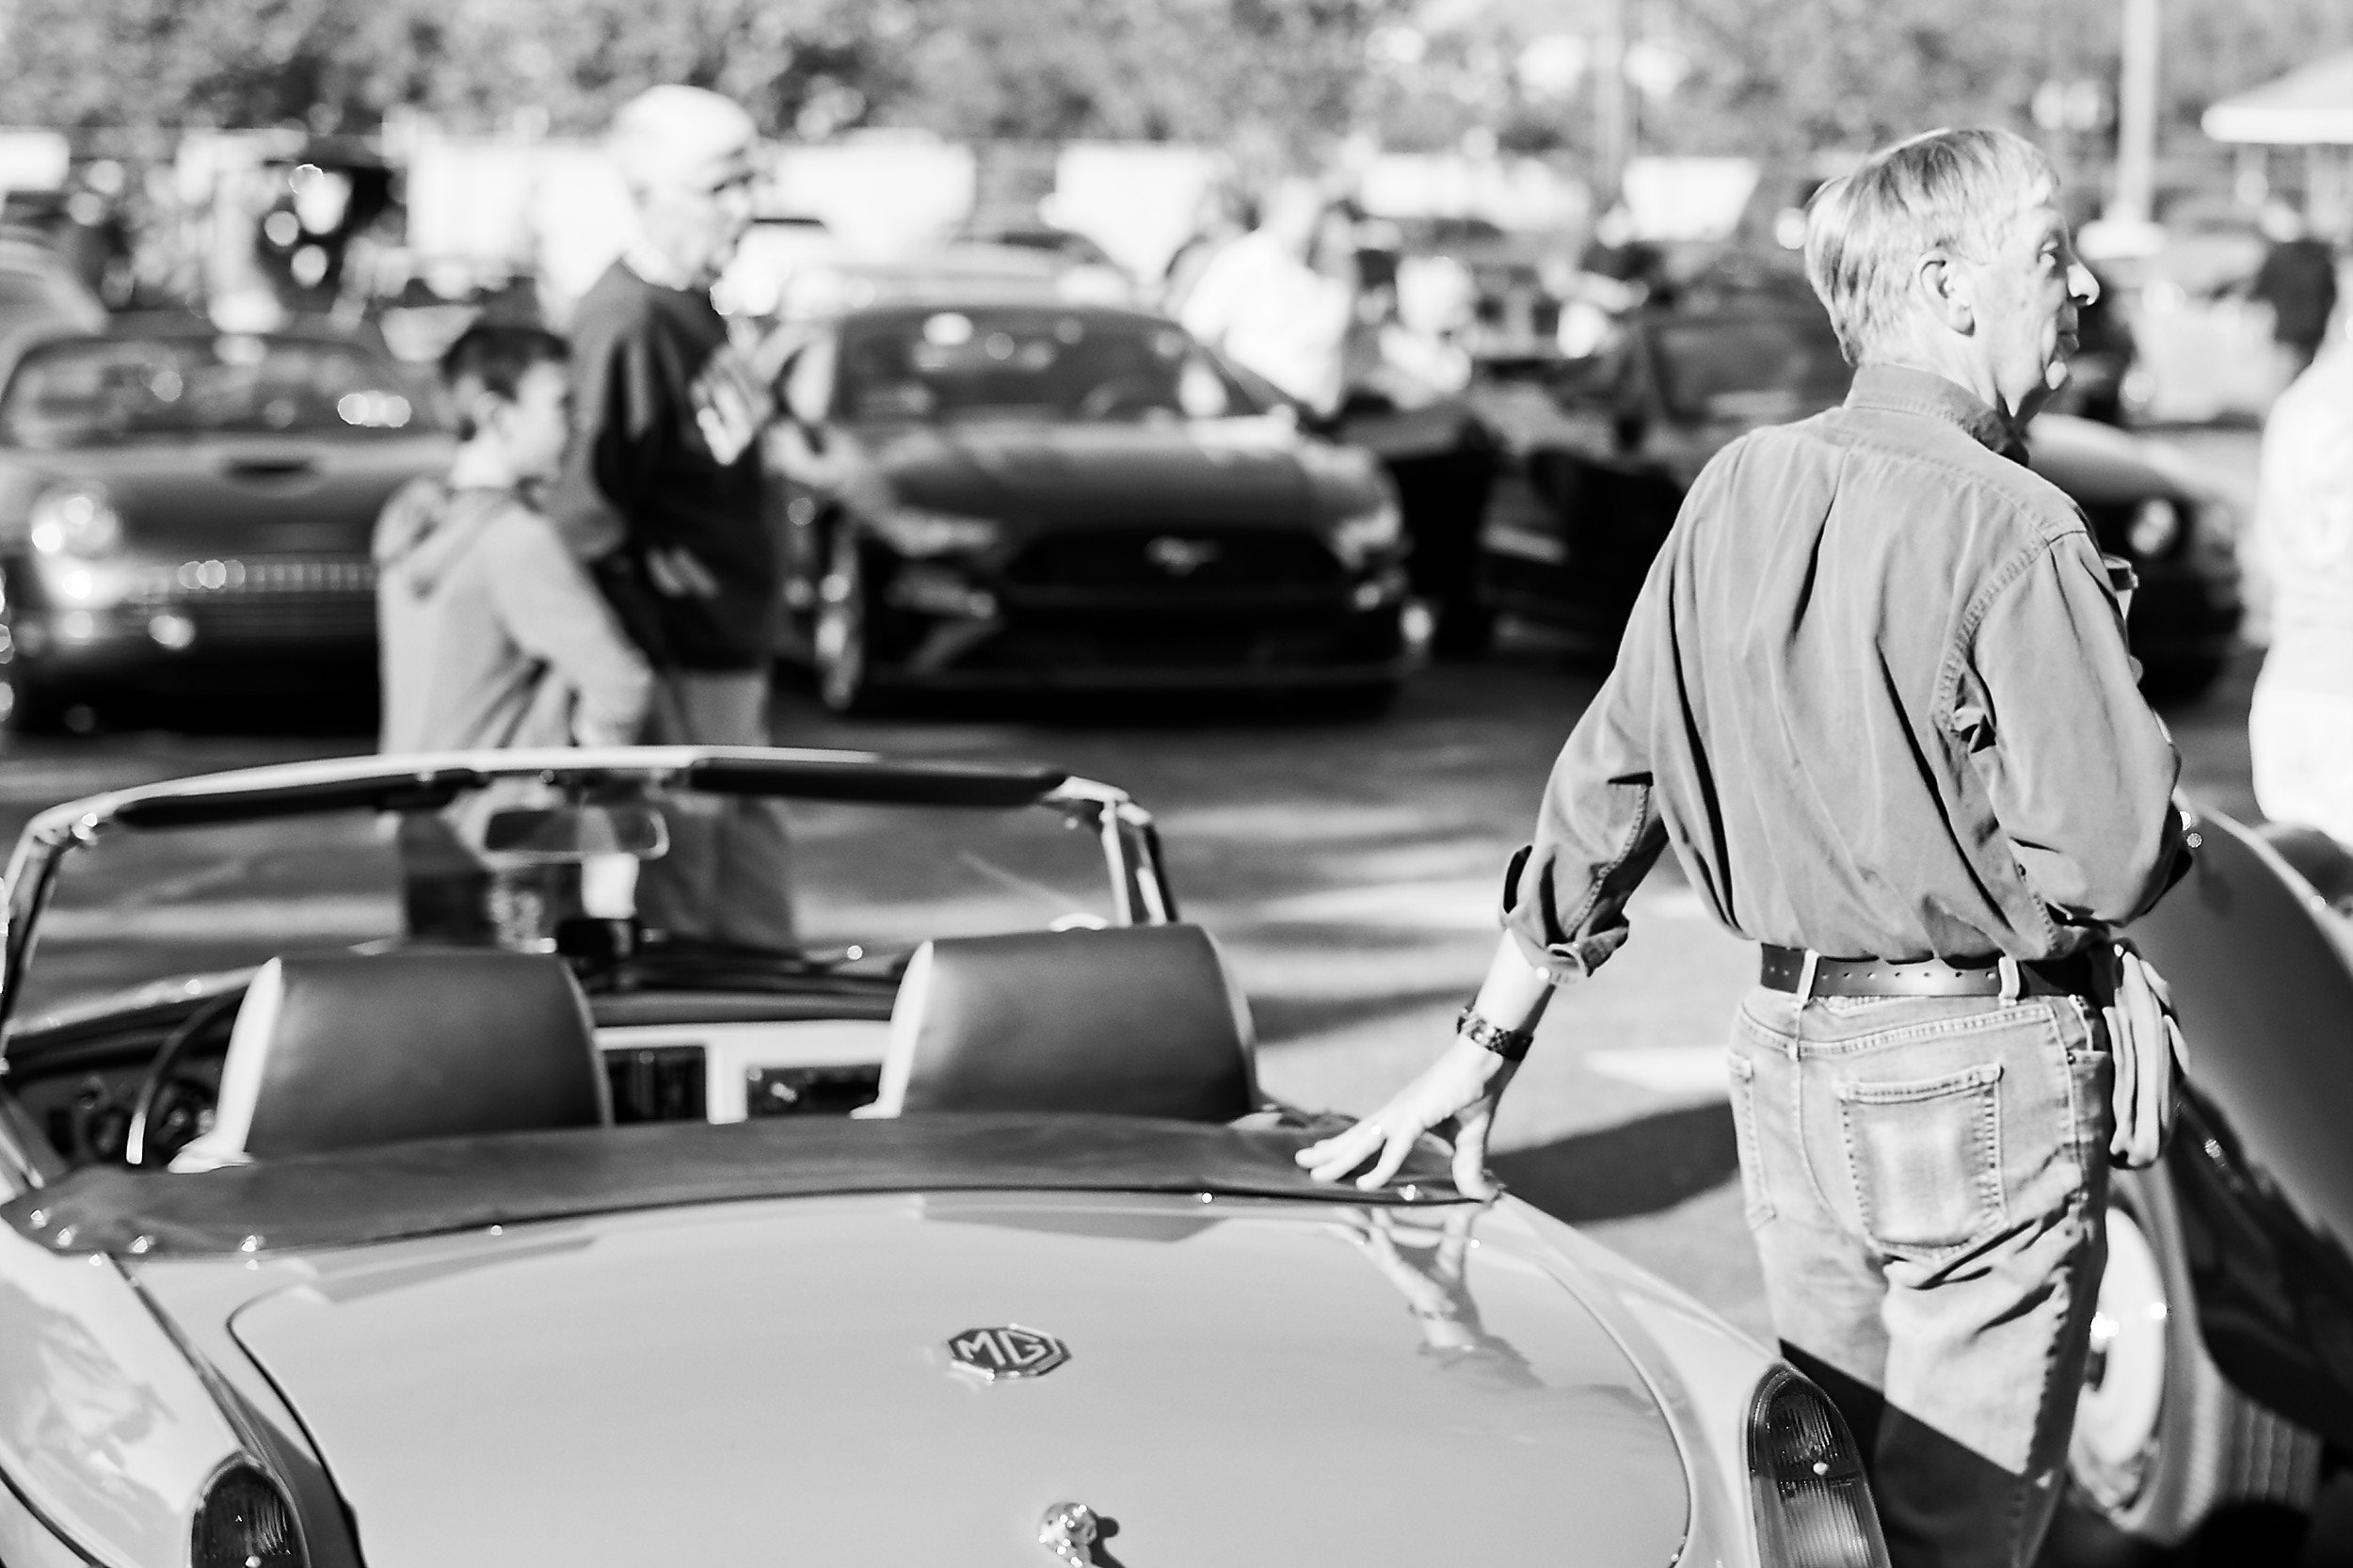  black and white image of a man placing his hand on a vintage MG at a car show 